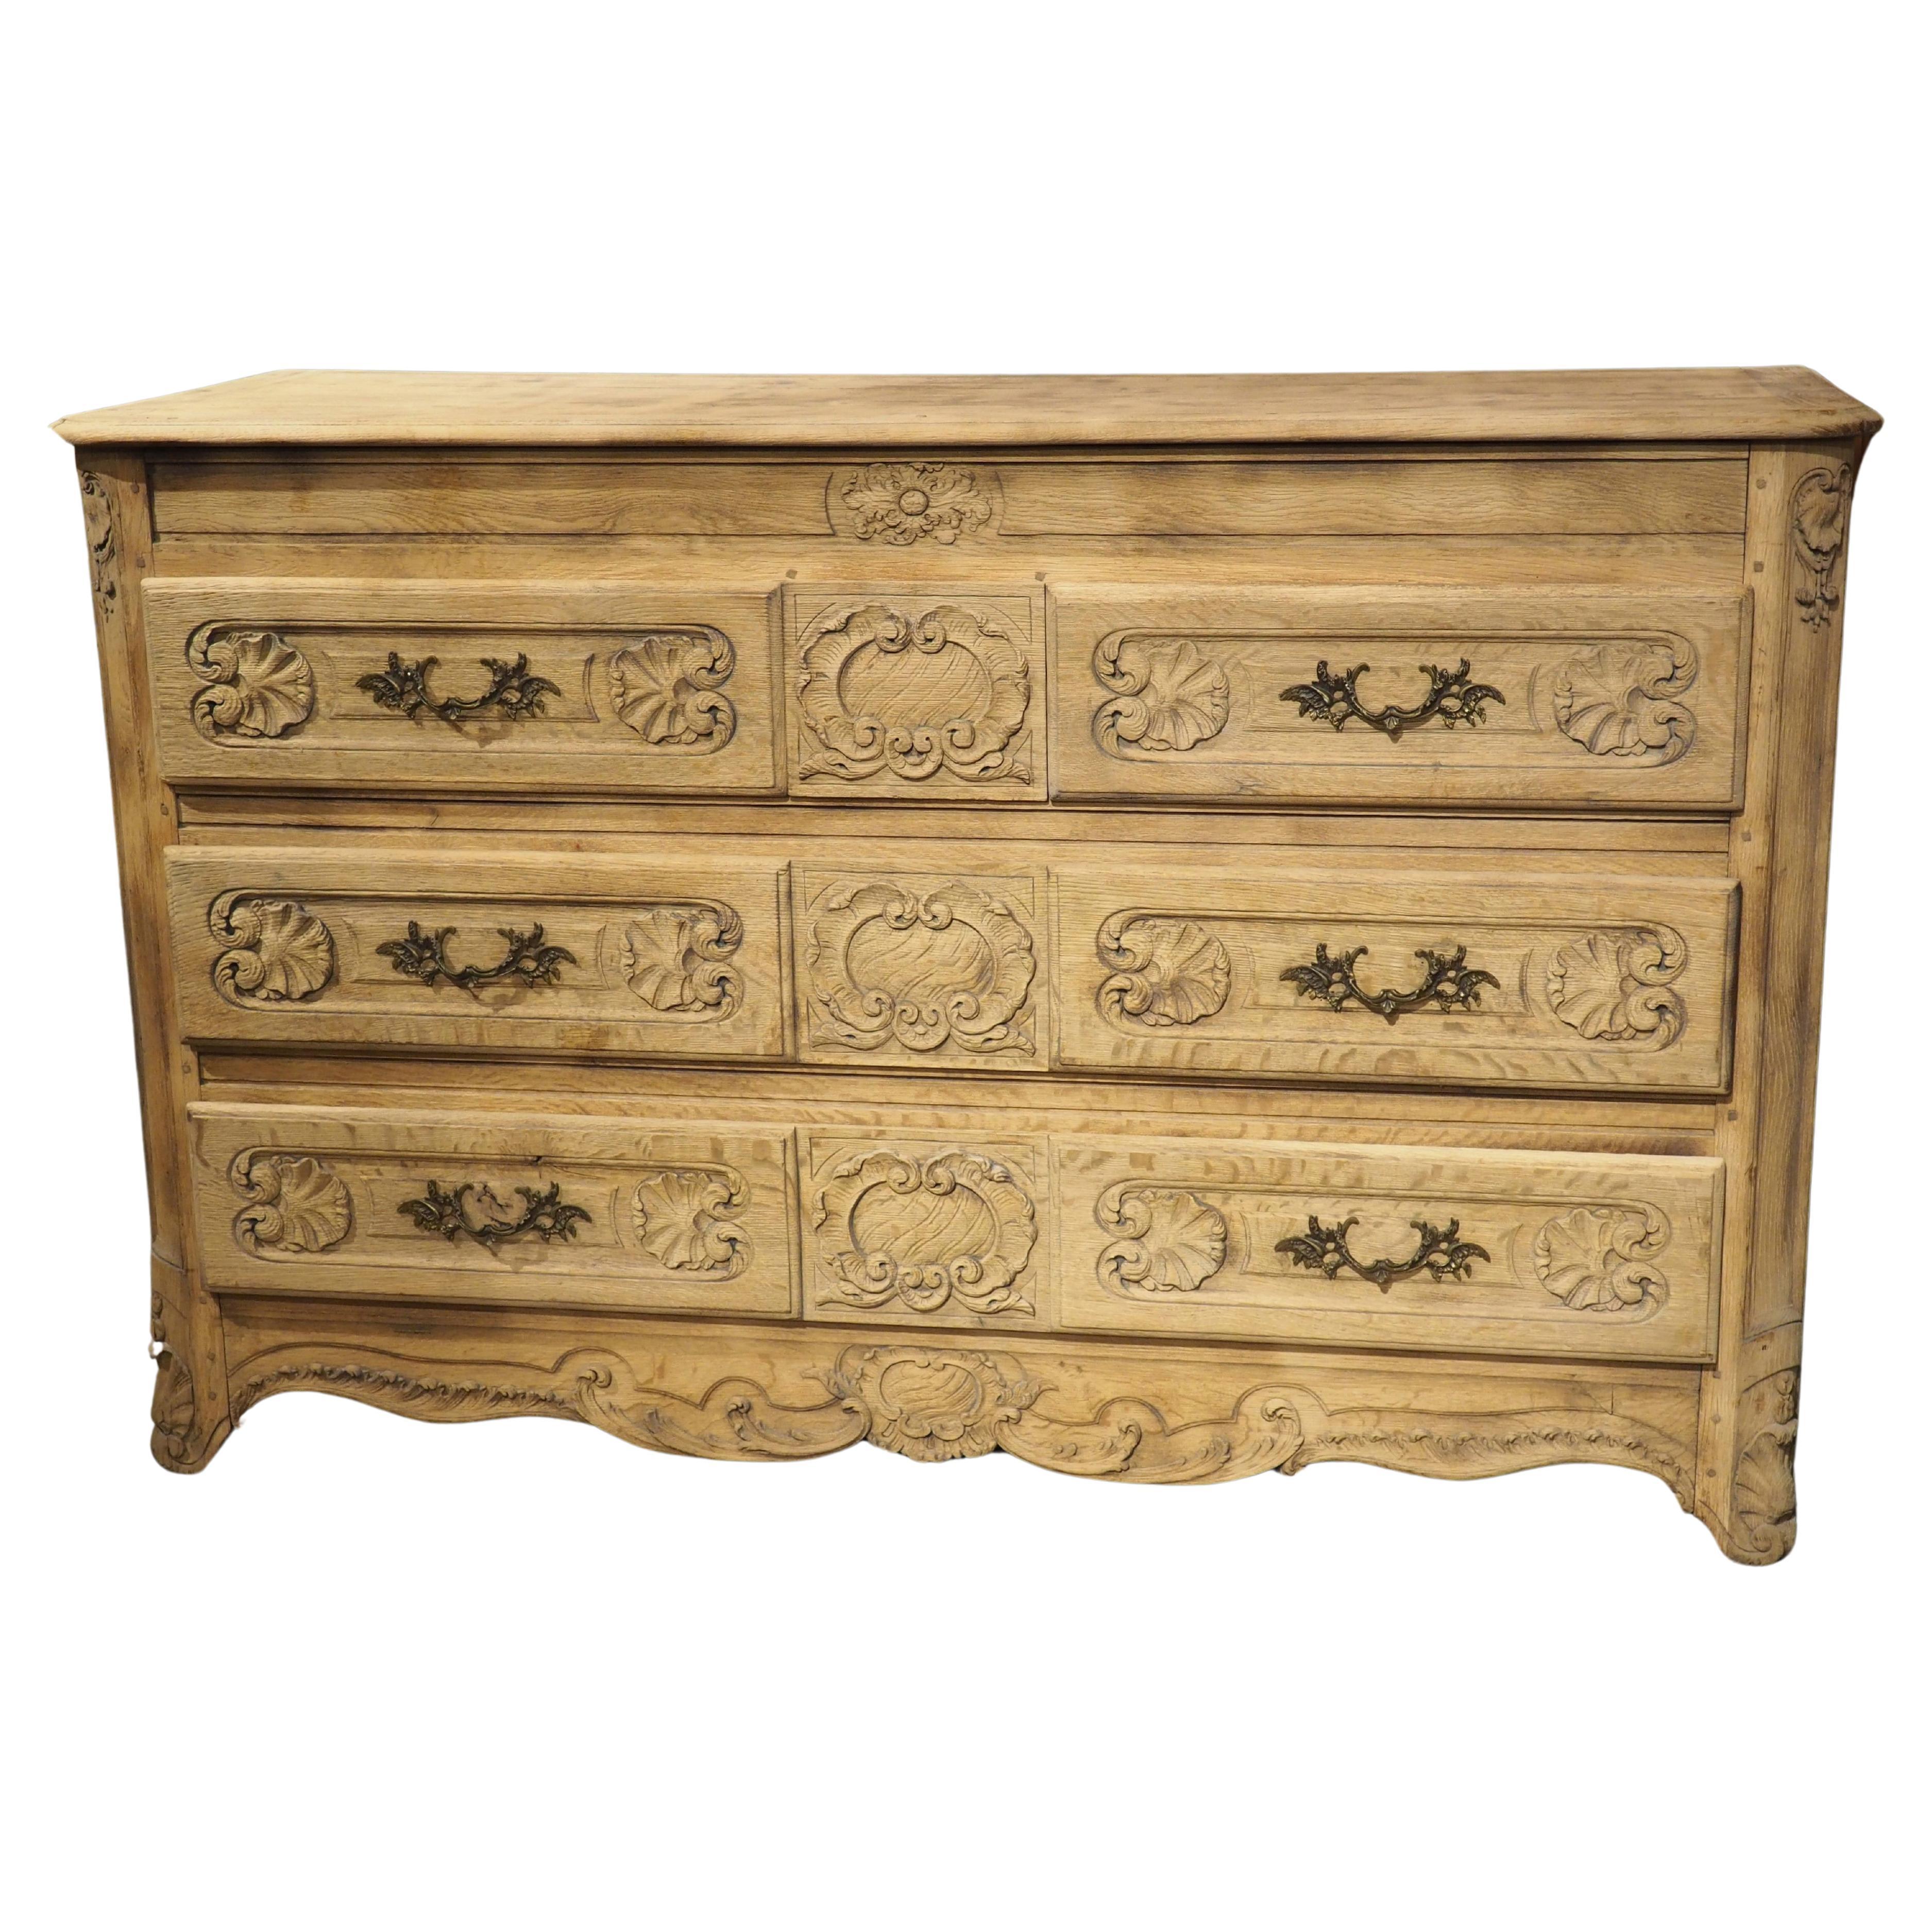 A Large 19th Century Carved Oak Commode from France